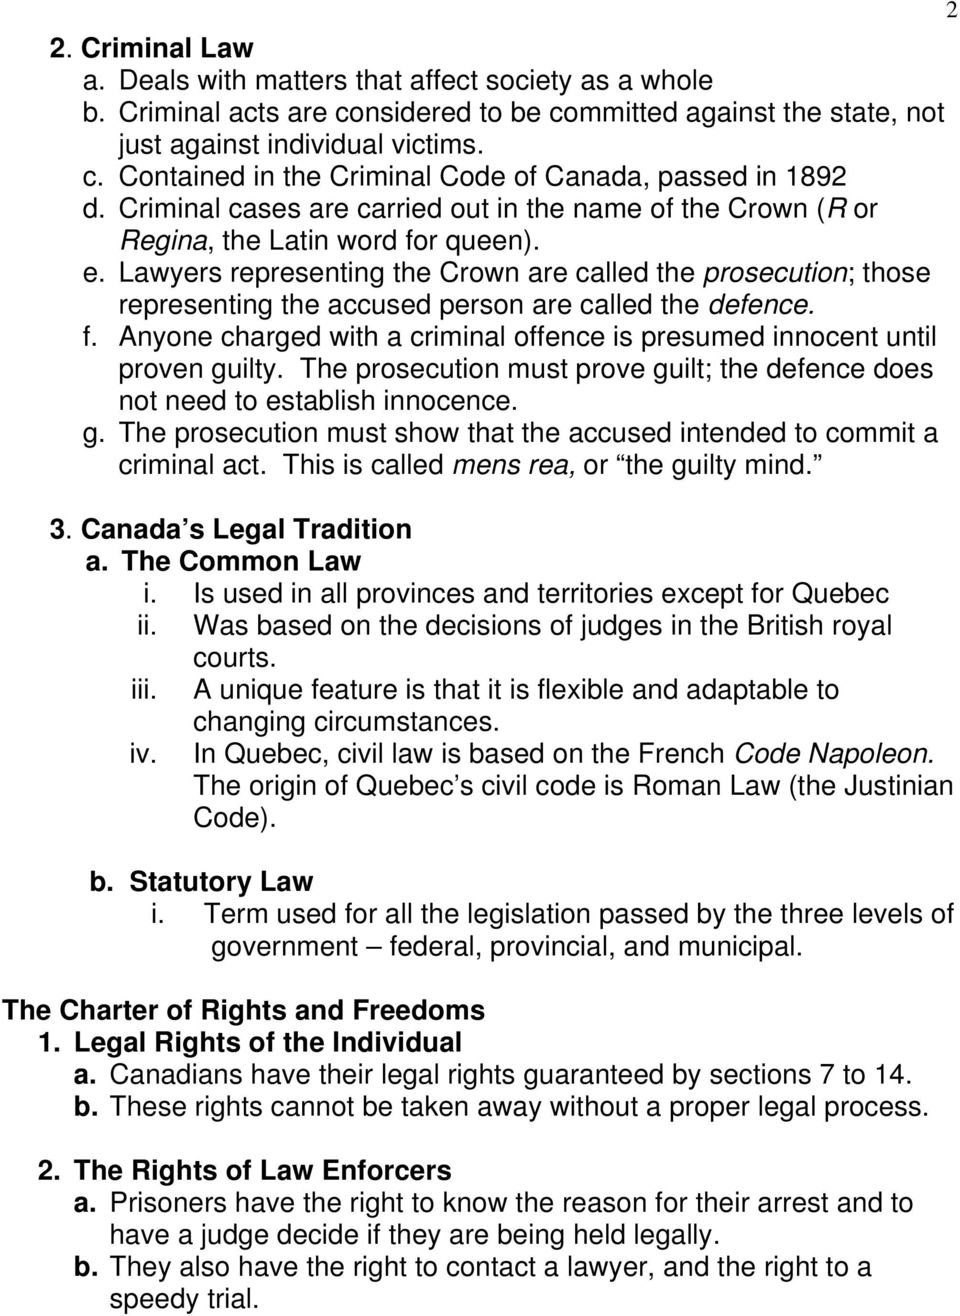 Lawyers representing the Crown are called the prosecution; those representing the accused person are called the defence. f.